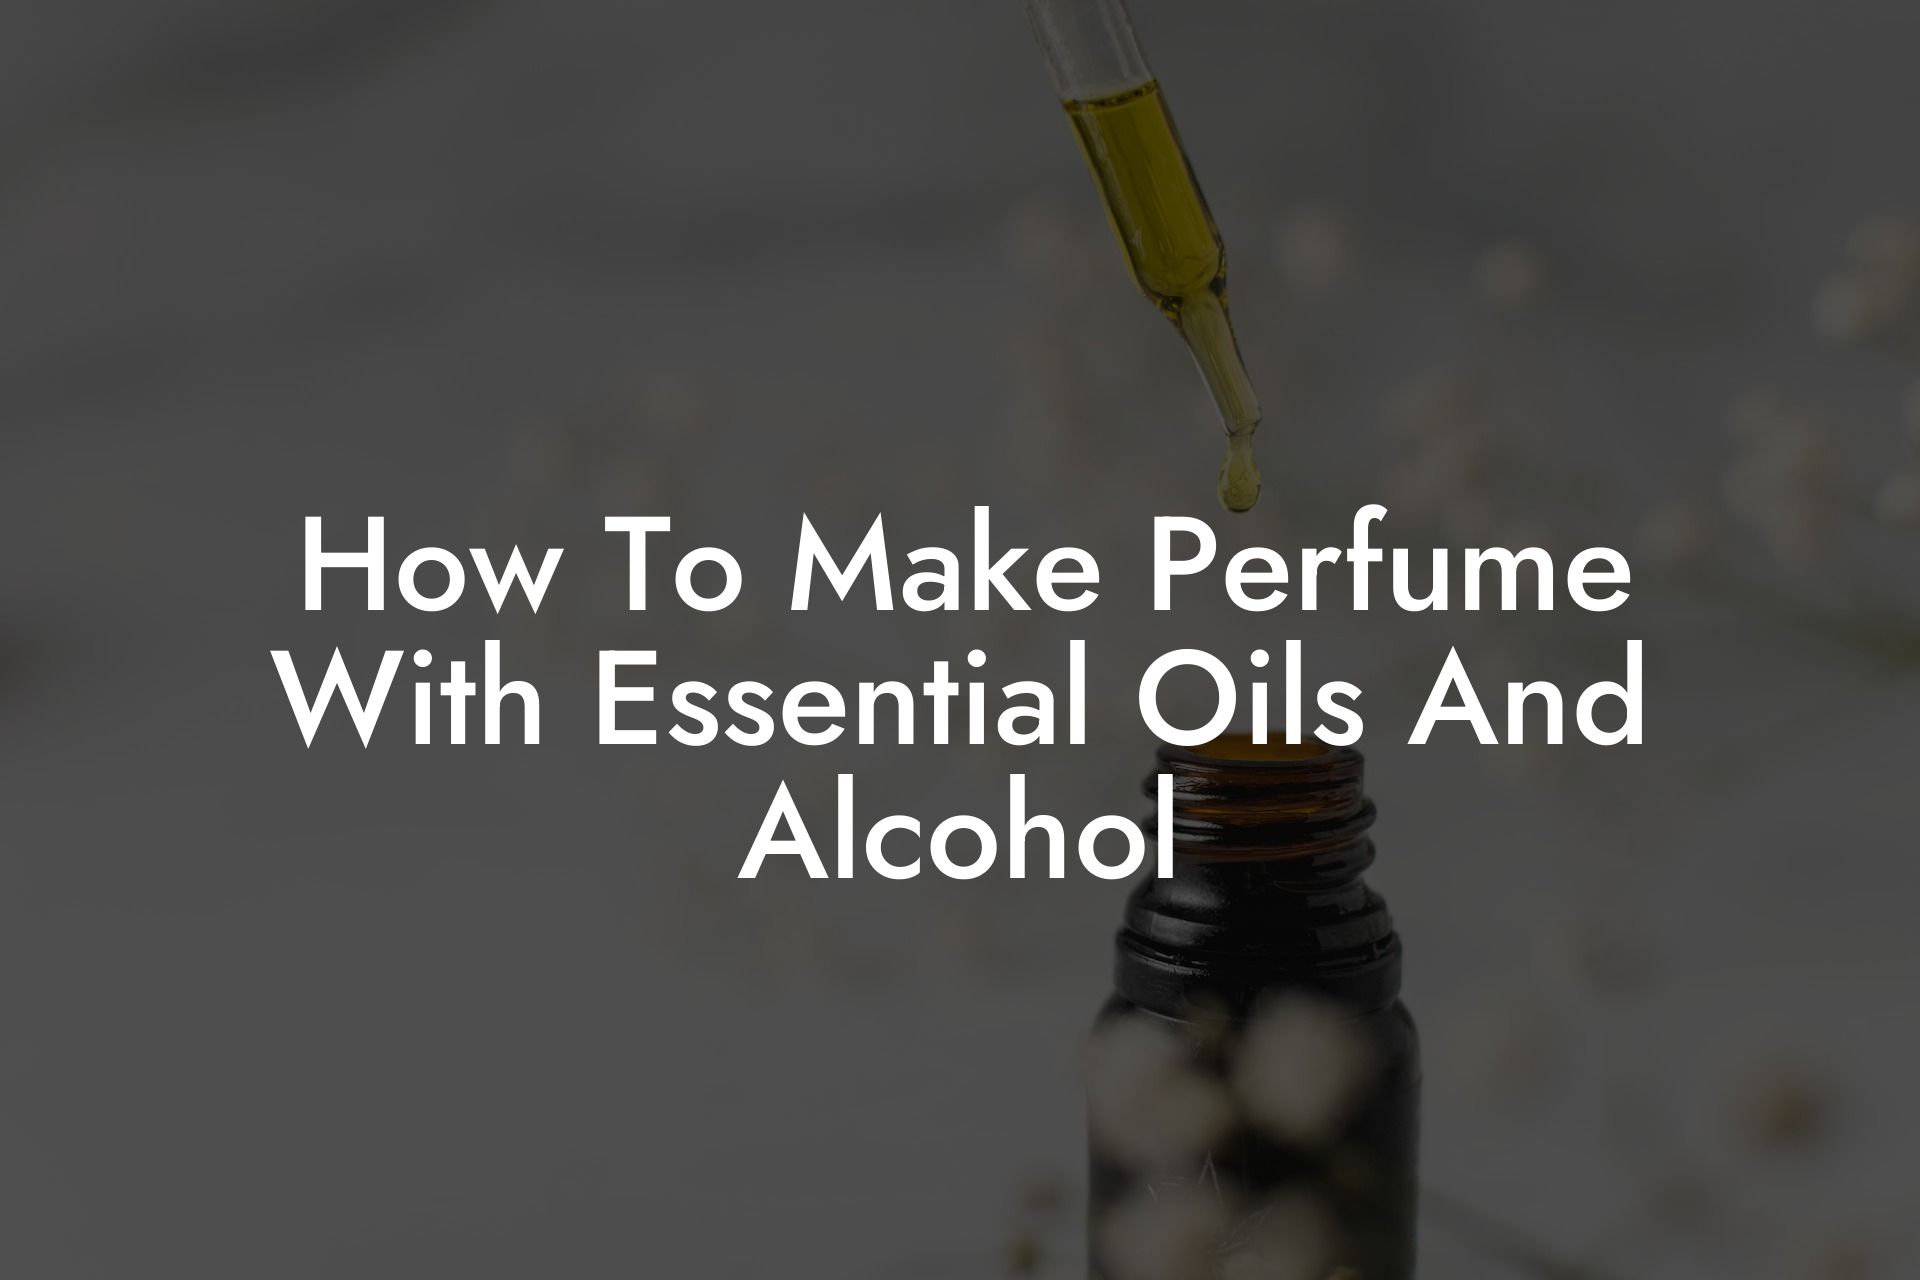 How To Make Perfume With Essential Oils And Alcohol